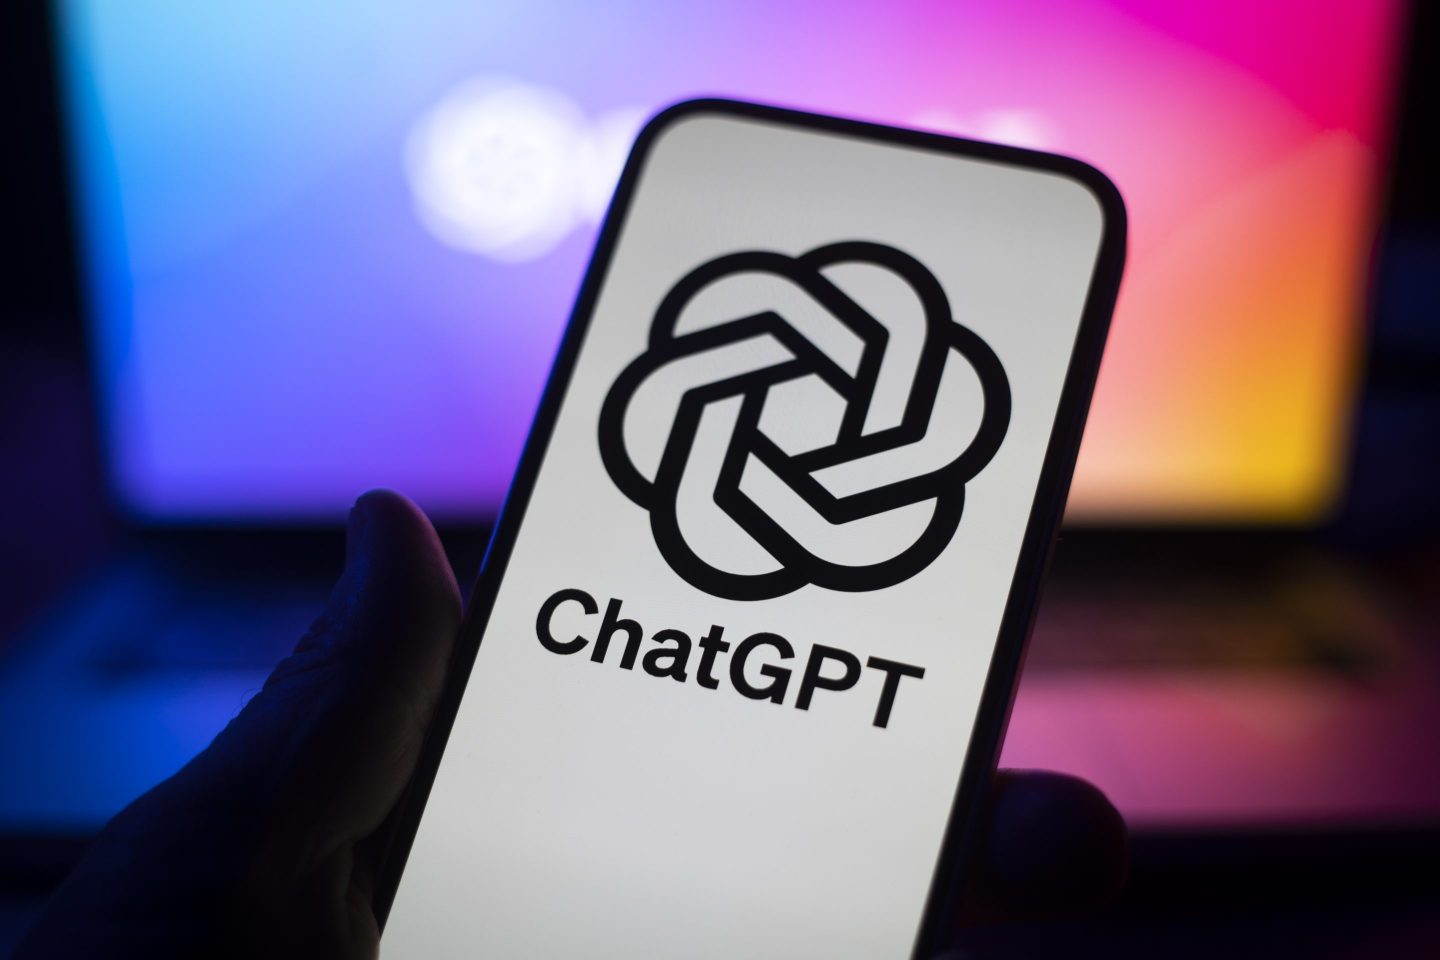 Phone screen with the ChatGPT logo.